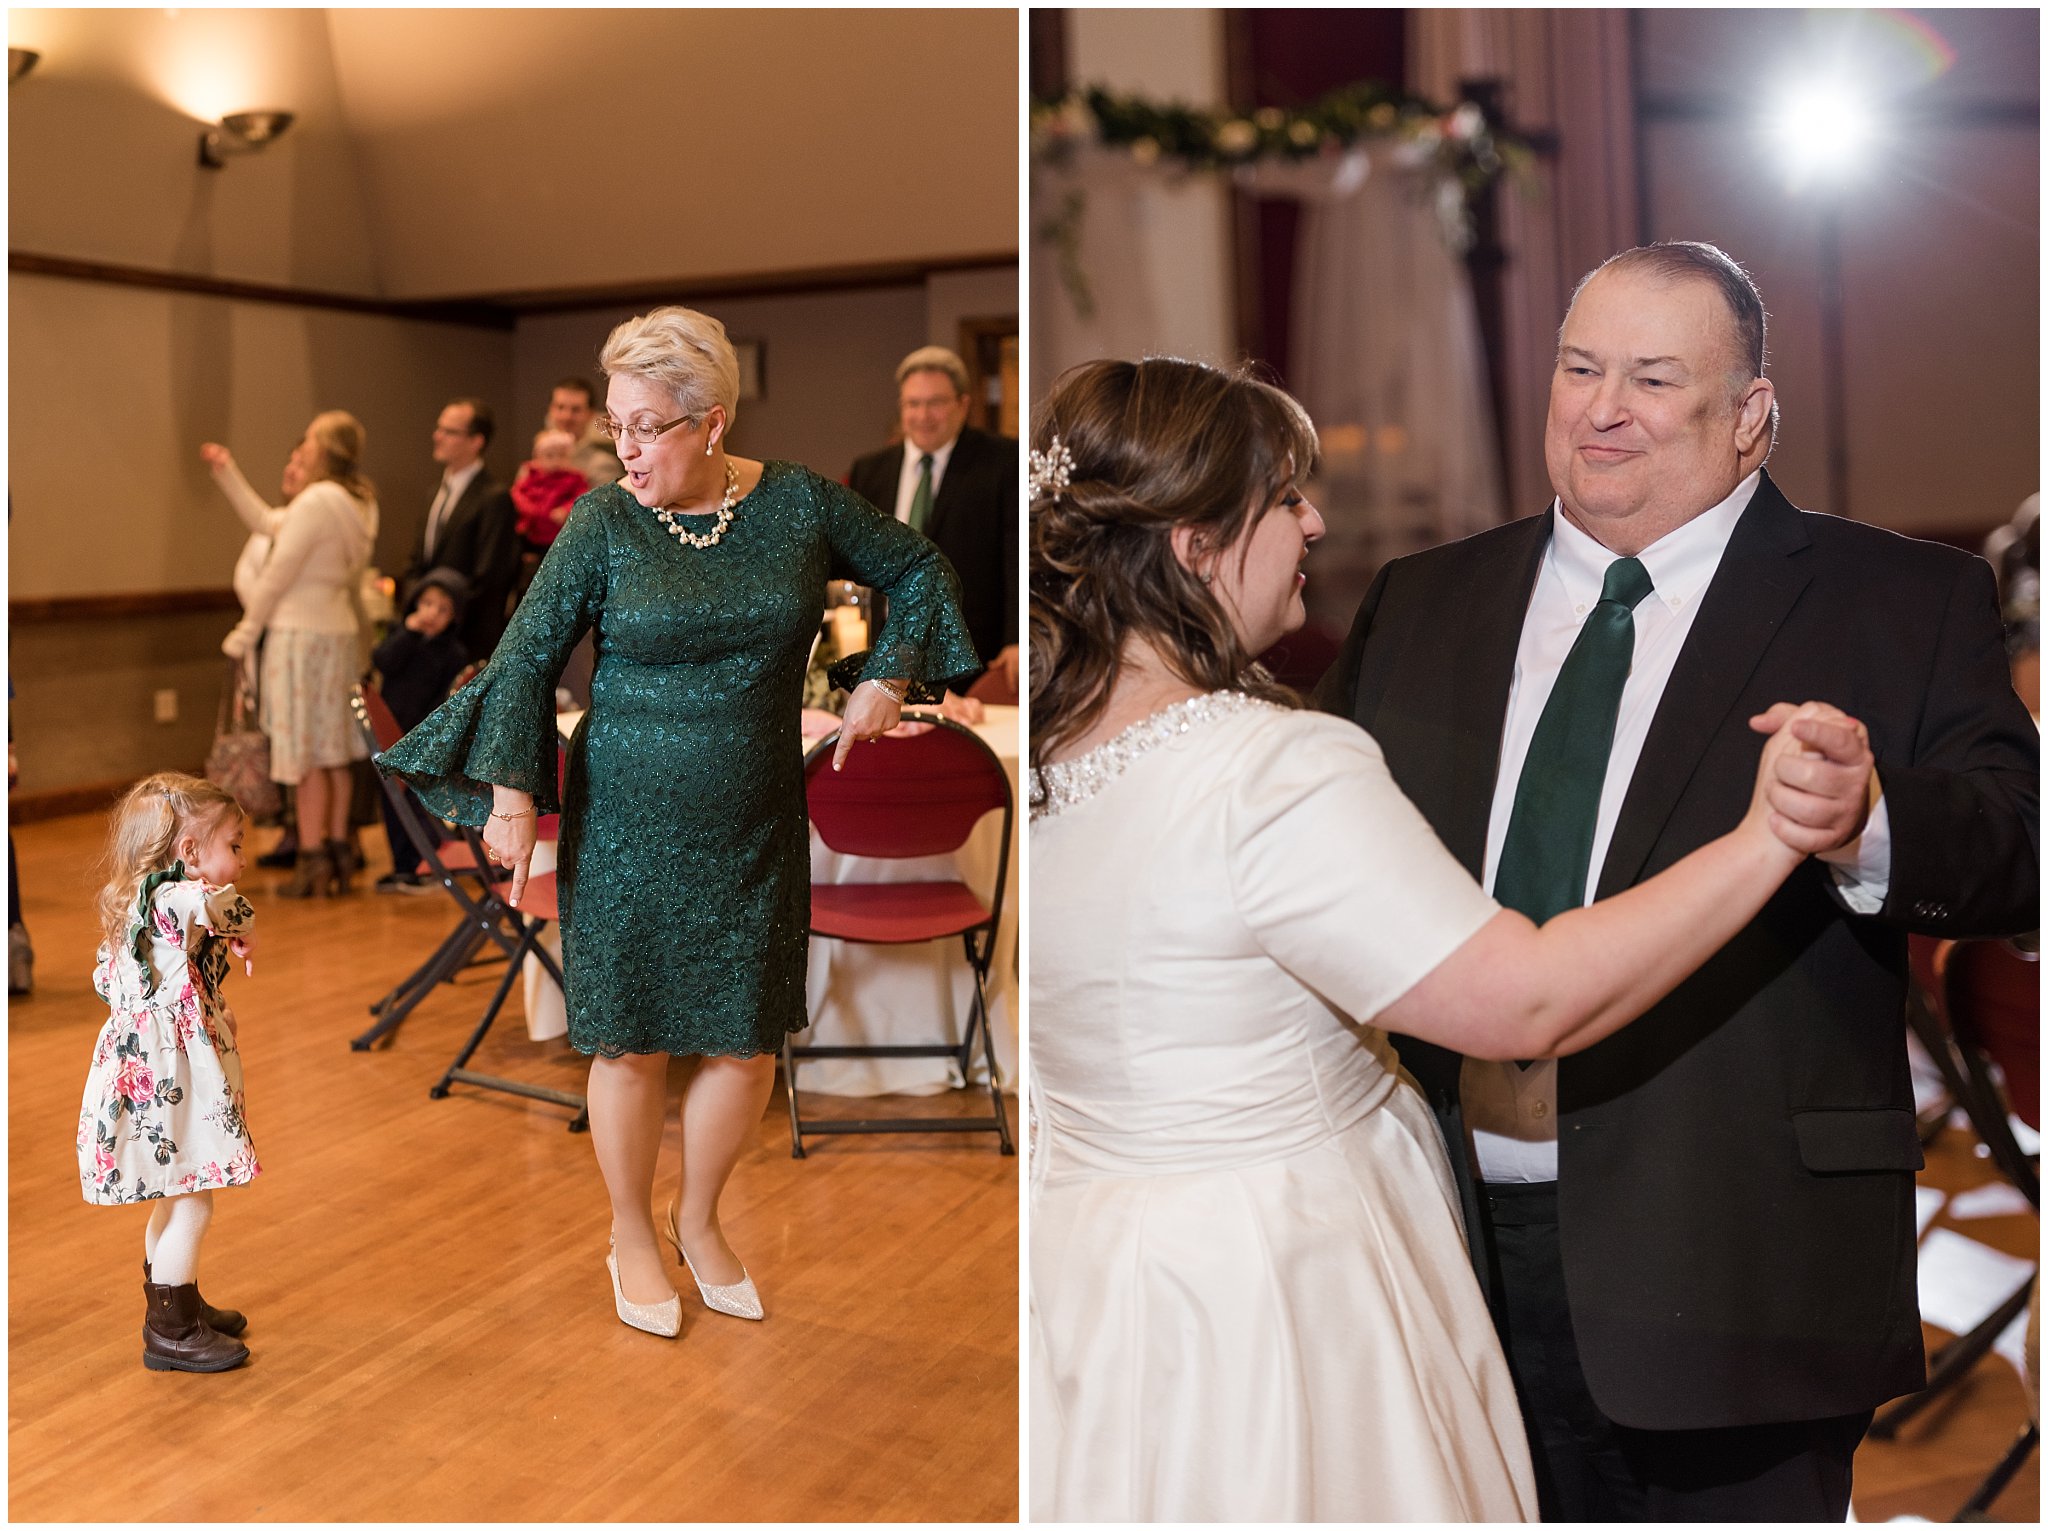 Grandma dancing with grand-daughter and daddy daughter dance | Ogden Temple Wedding | Jessie and Dallin Photography